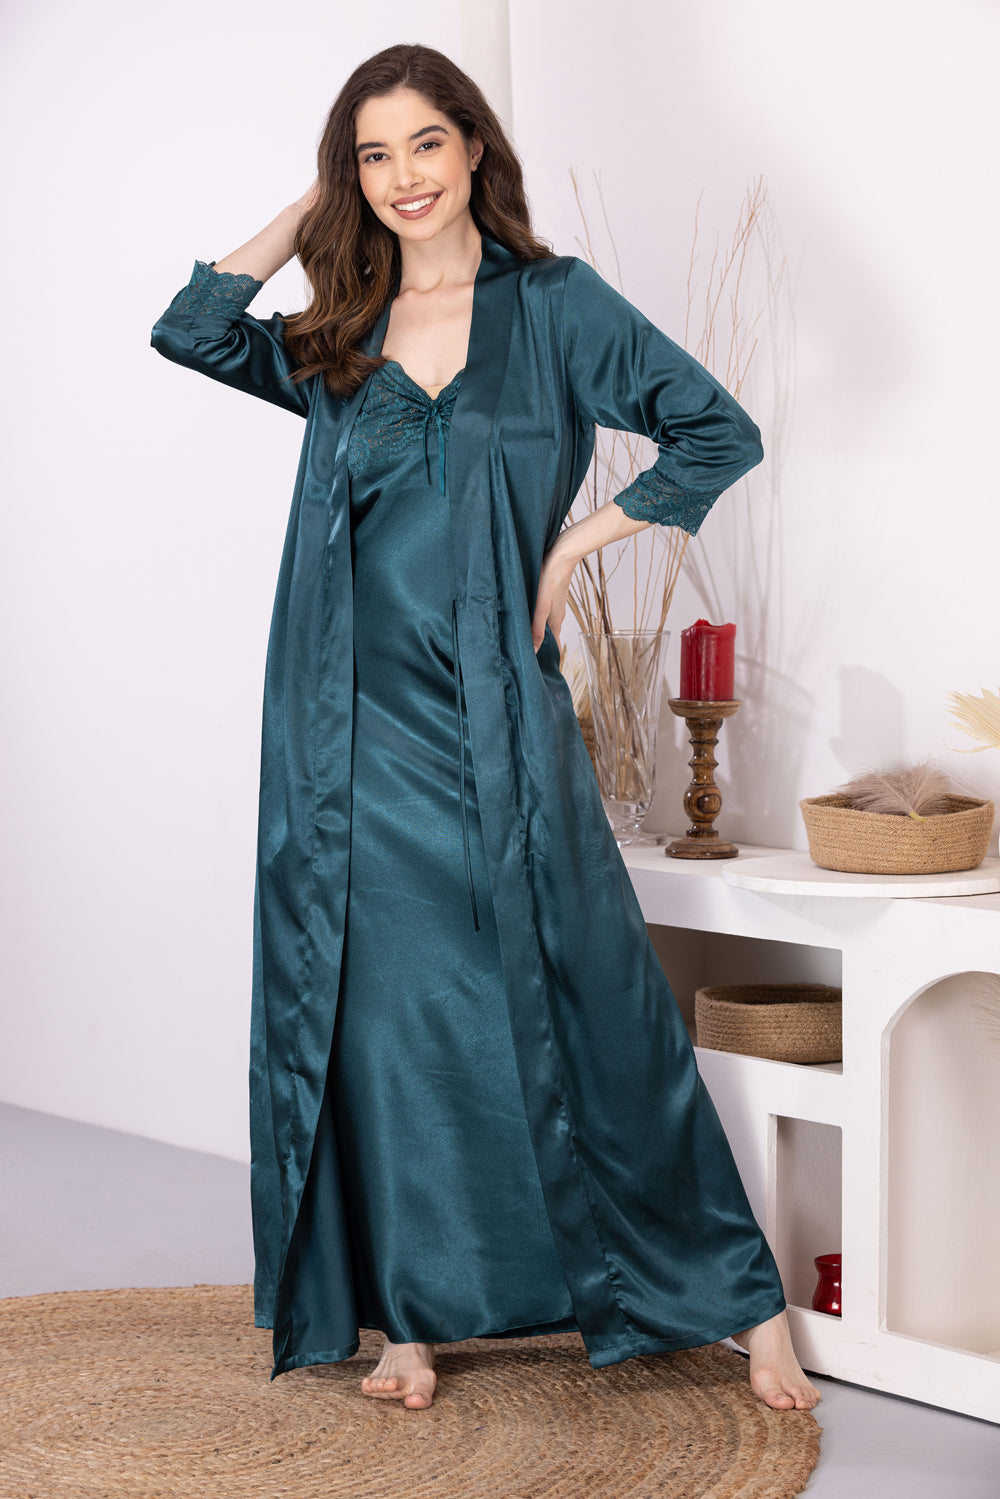 Private Lives  Ultimate Sleepwear Brand for Women  Tagged NIGHTGOWN SETS  Page 2